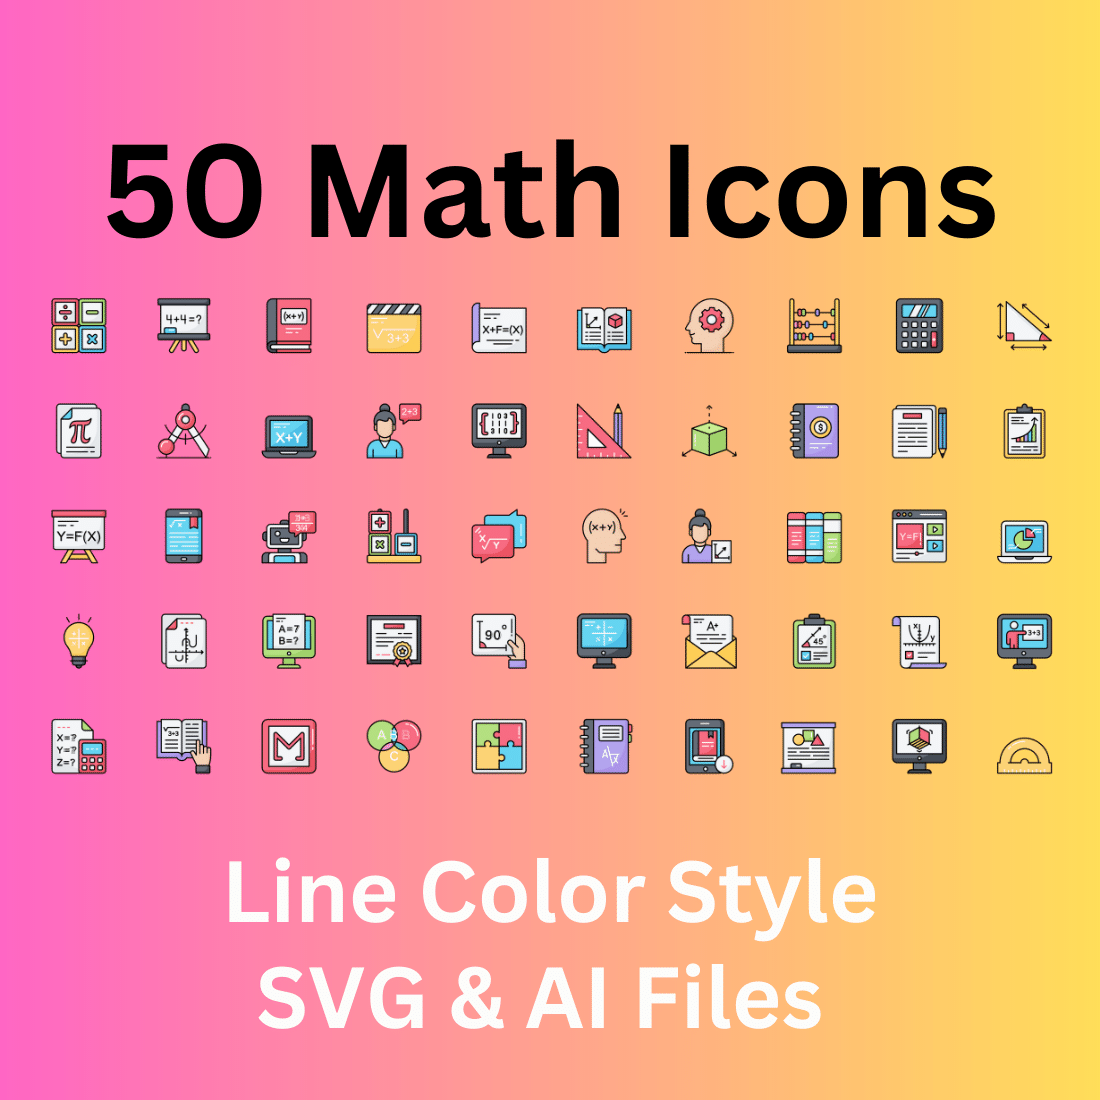 Math Icon Set 50 Line Color Icons - SVG And AI Files cover image.